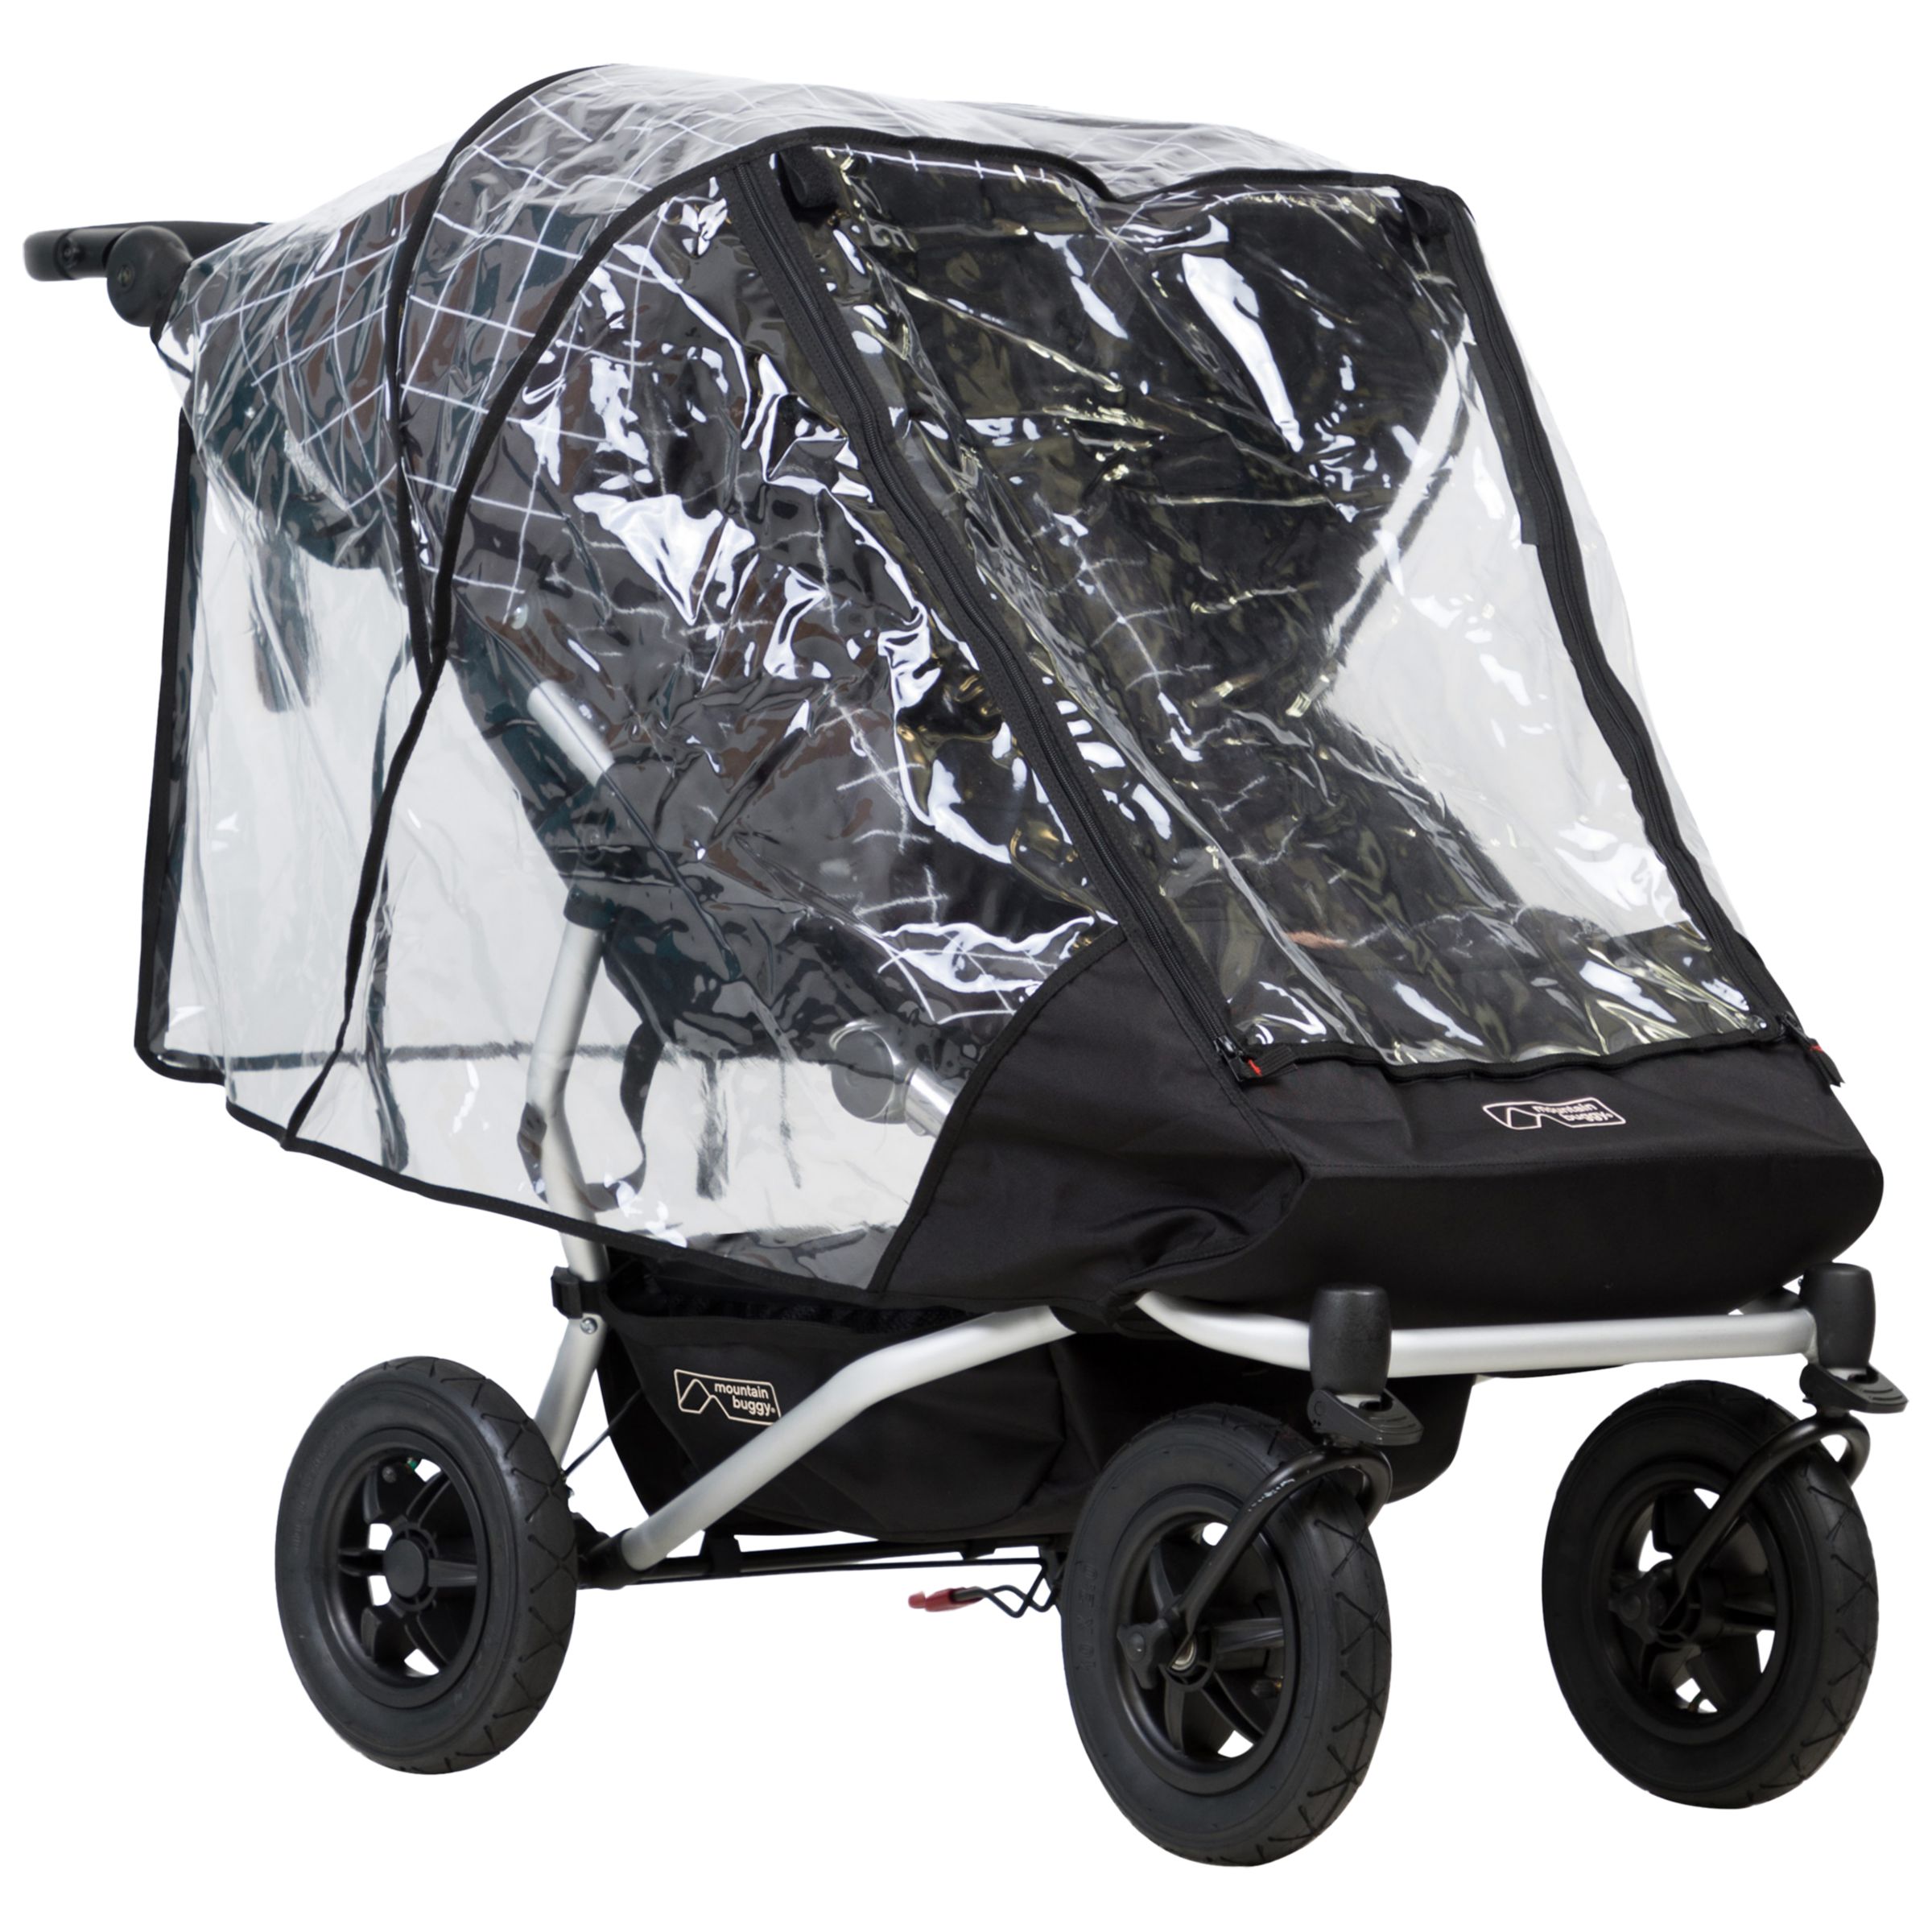 pushchair cover